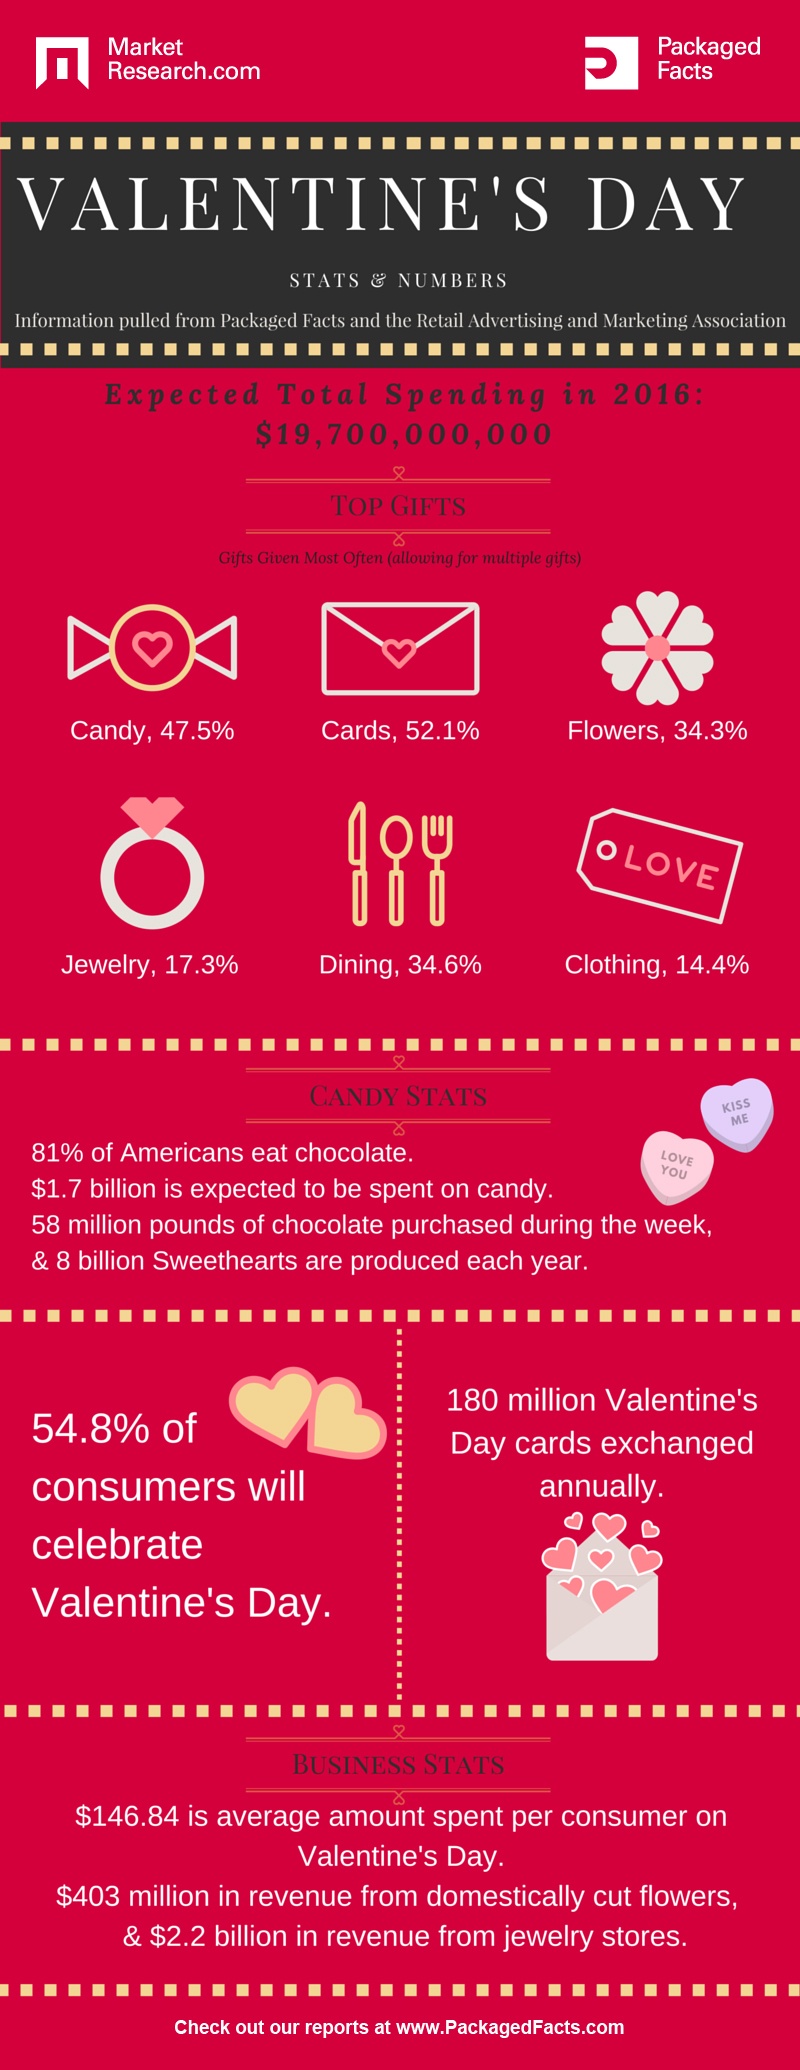 Valentine's Day Consumer Spending Trends and Statistics [Infographic]